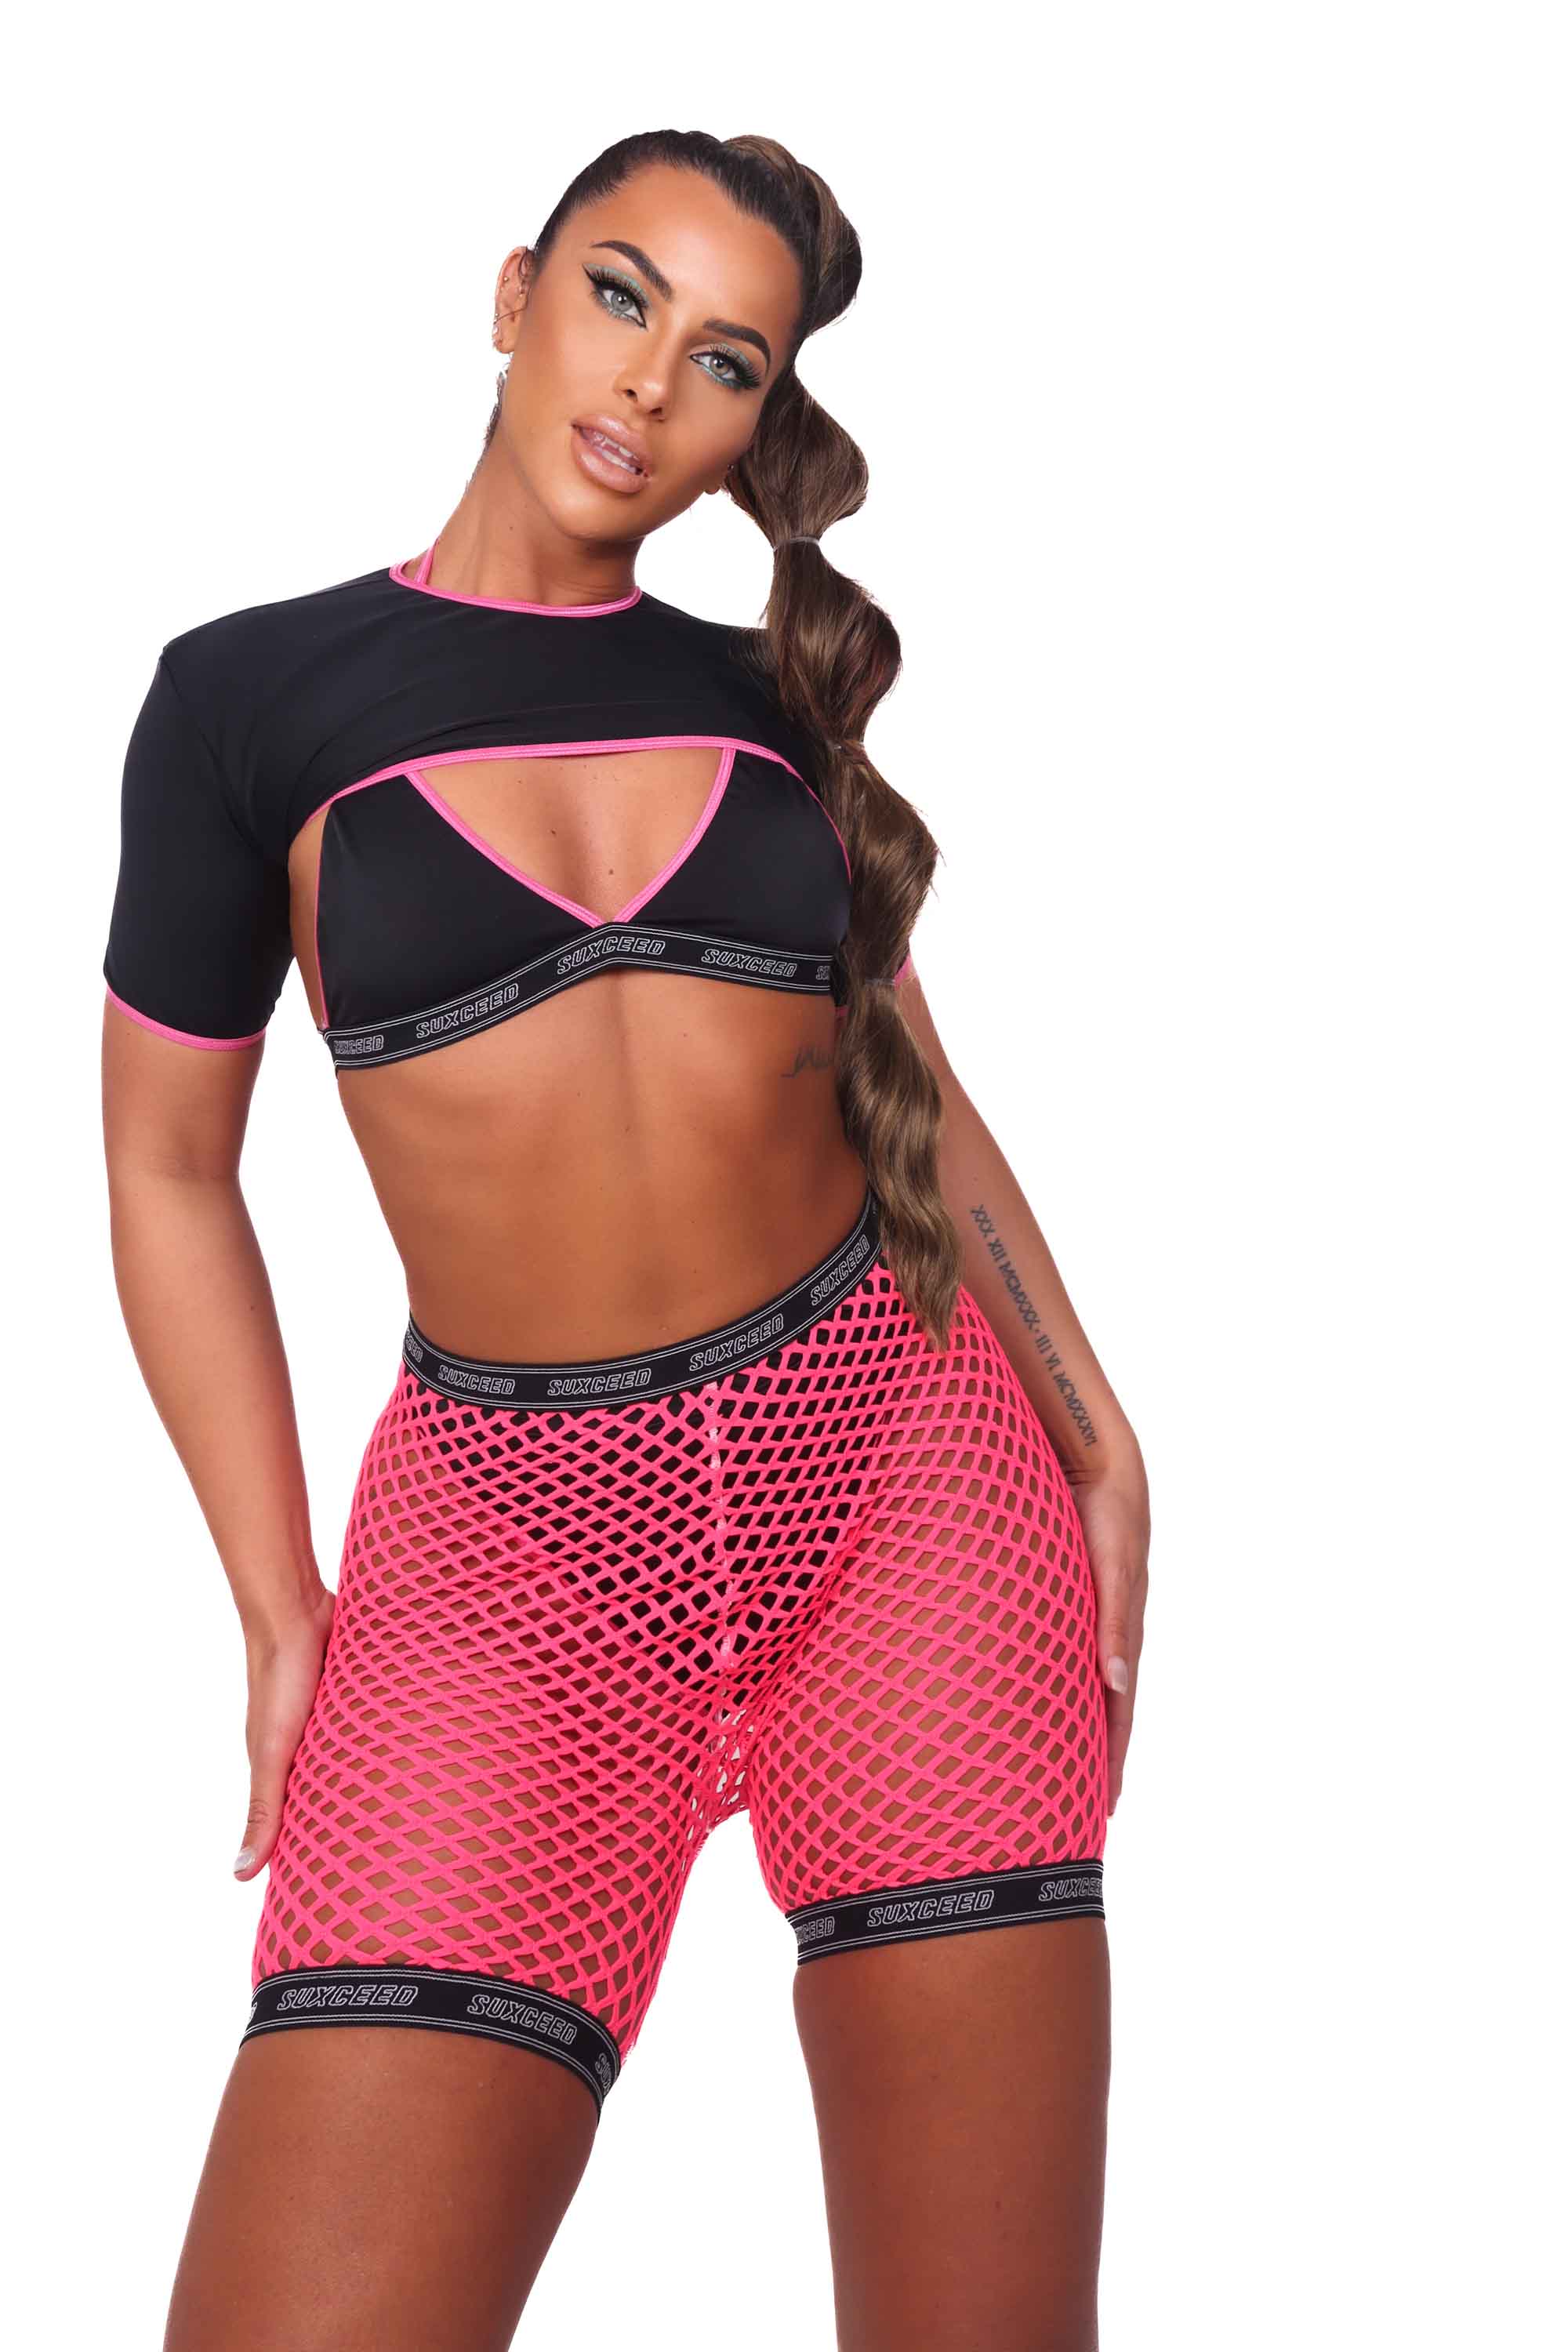 Cosmic Pink Netted Cycle Shorts - Suxceedwomens